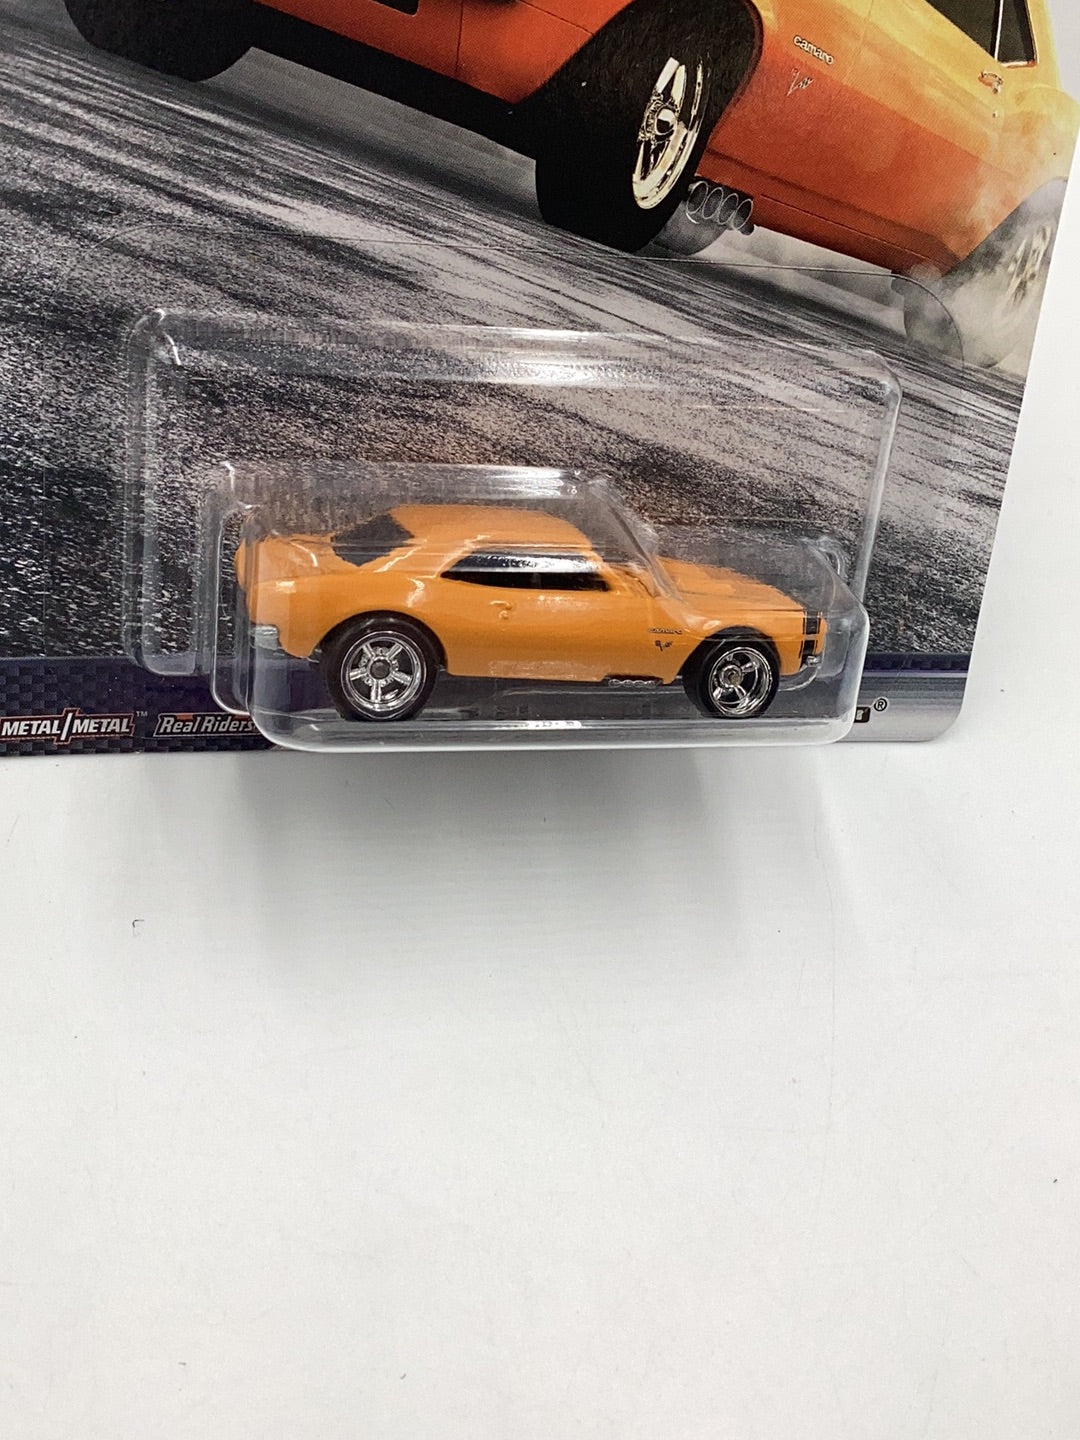 Hot Wheels fast and furious 1/4 Mile Muscle 4/5 67 Chevrolet Camaro 250E